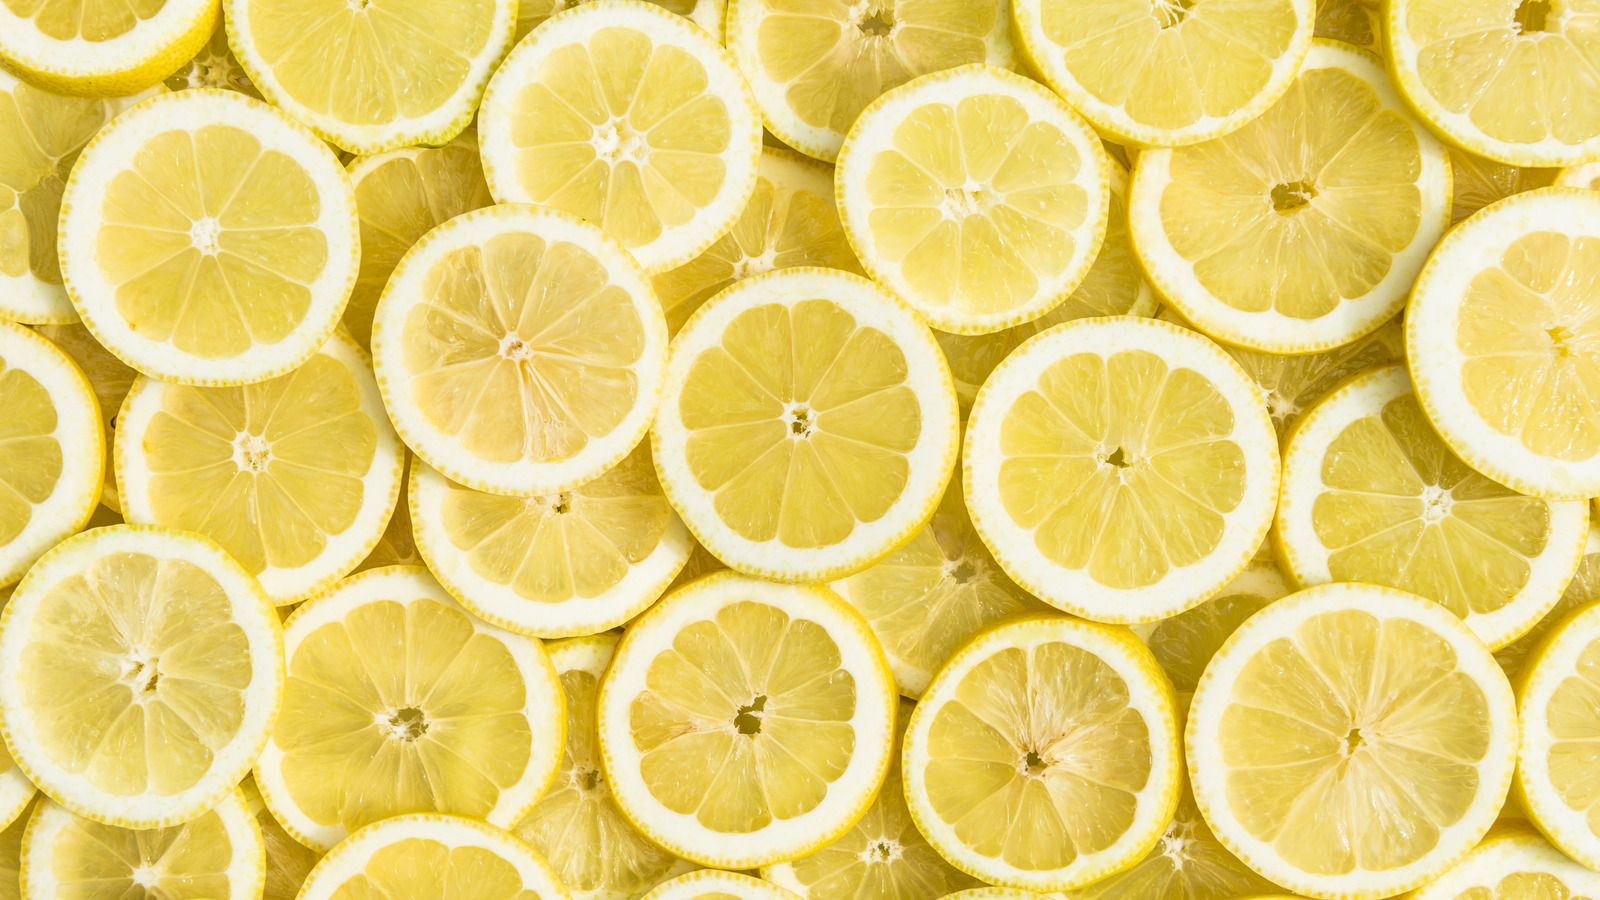 How to Store Lemons To Keep Them Fresh For a Month